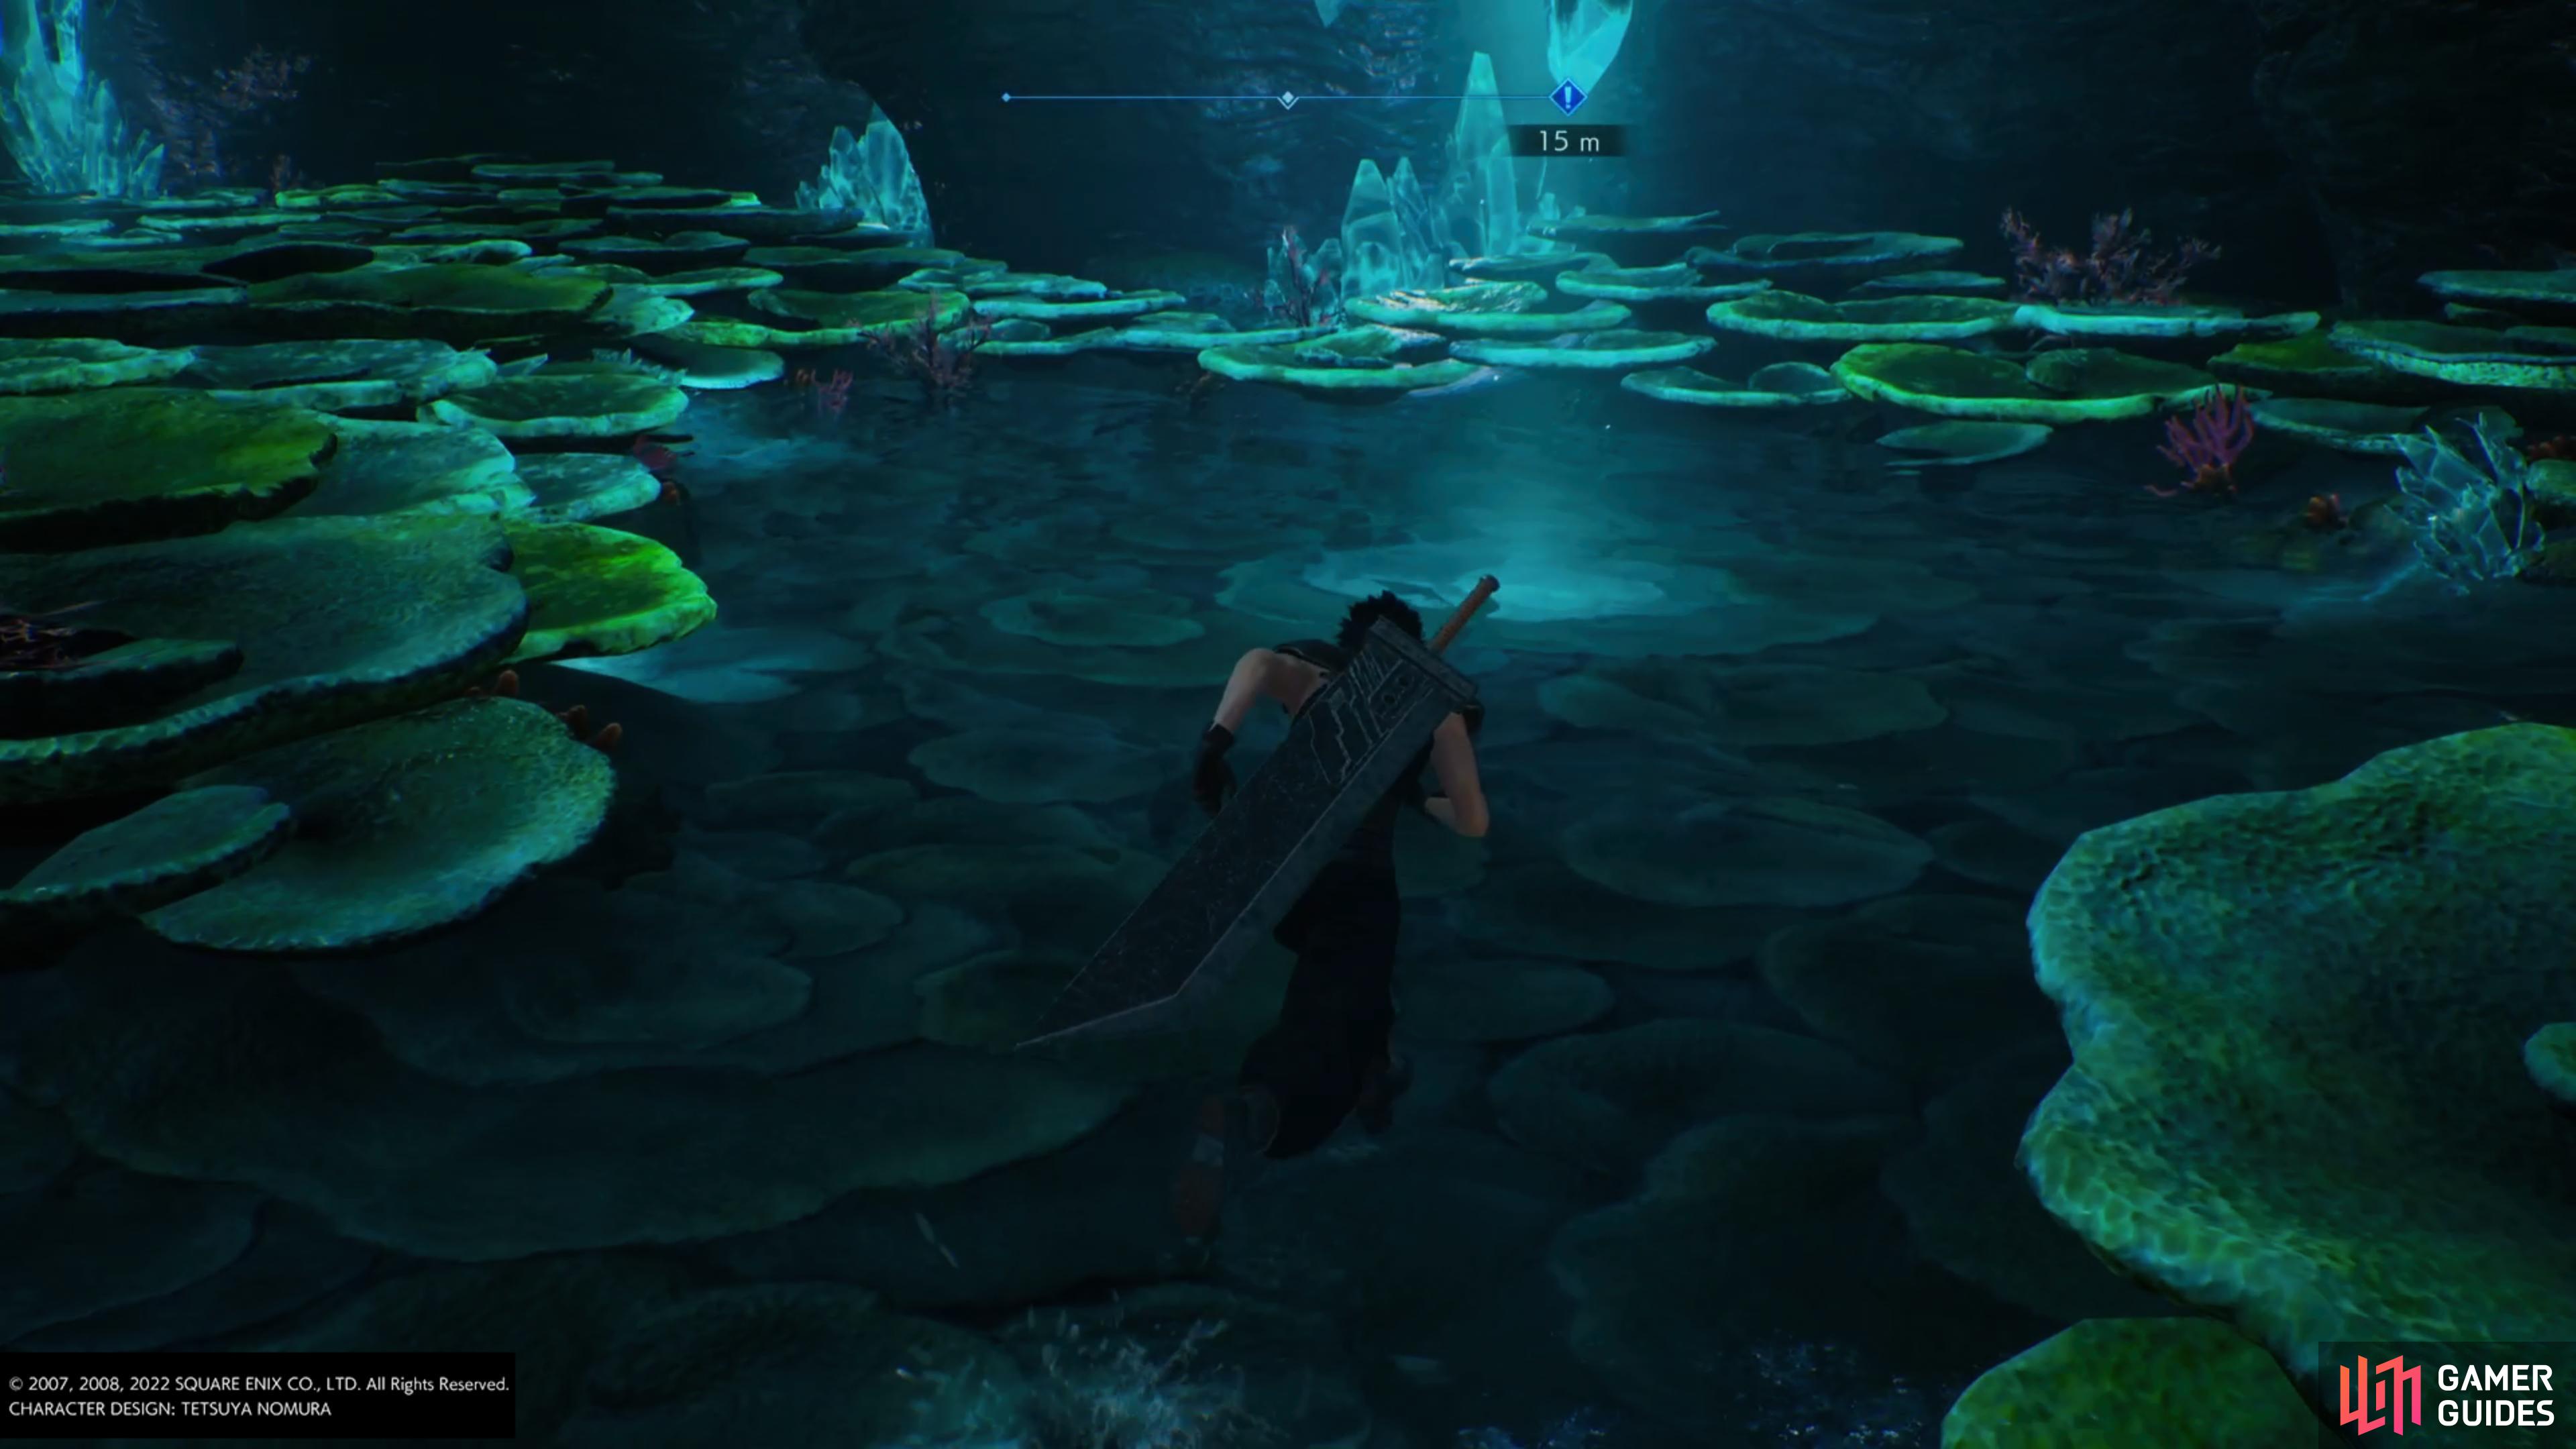 You’ll find five crystals in the Lake of Oblivion that you can interact with.